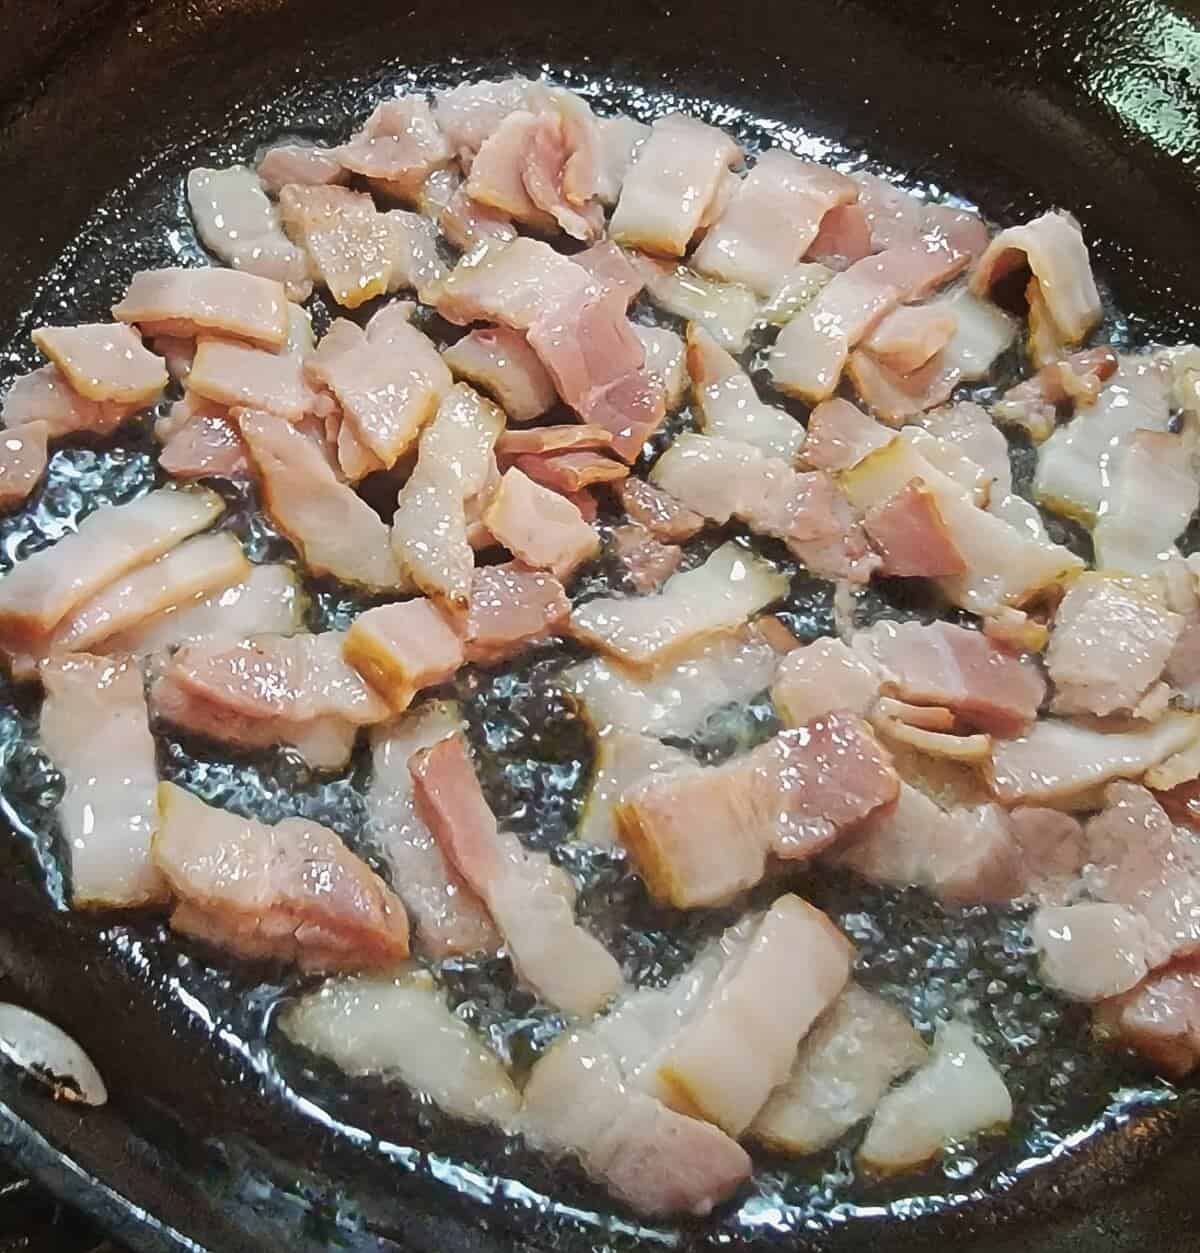 pieces of bacon beginning to fry in hot skillet